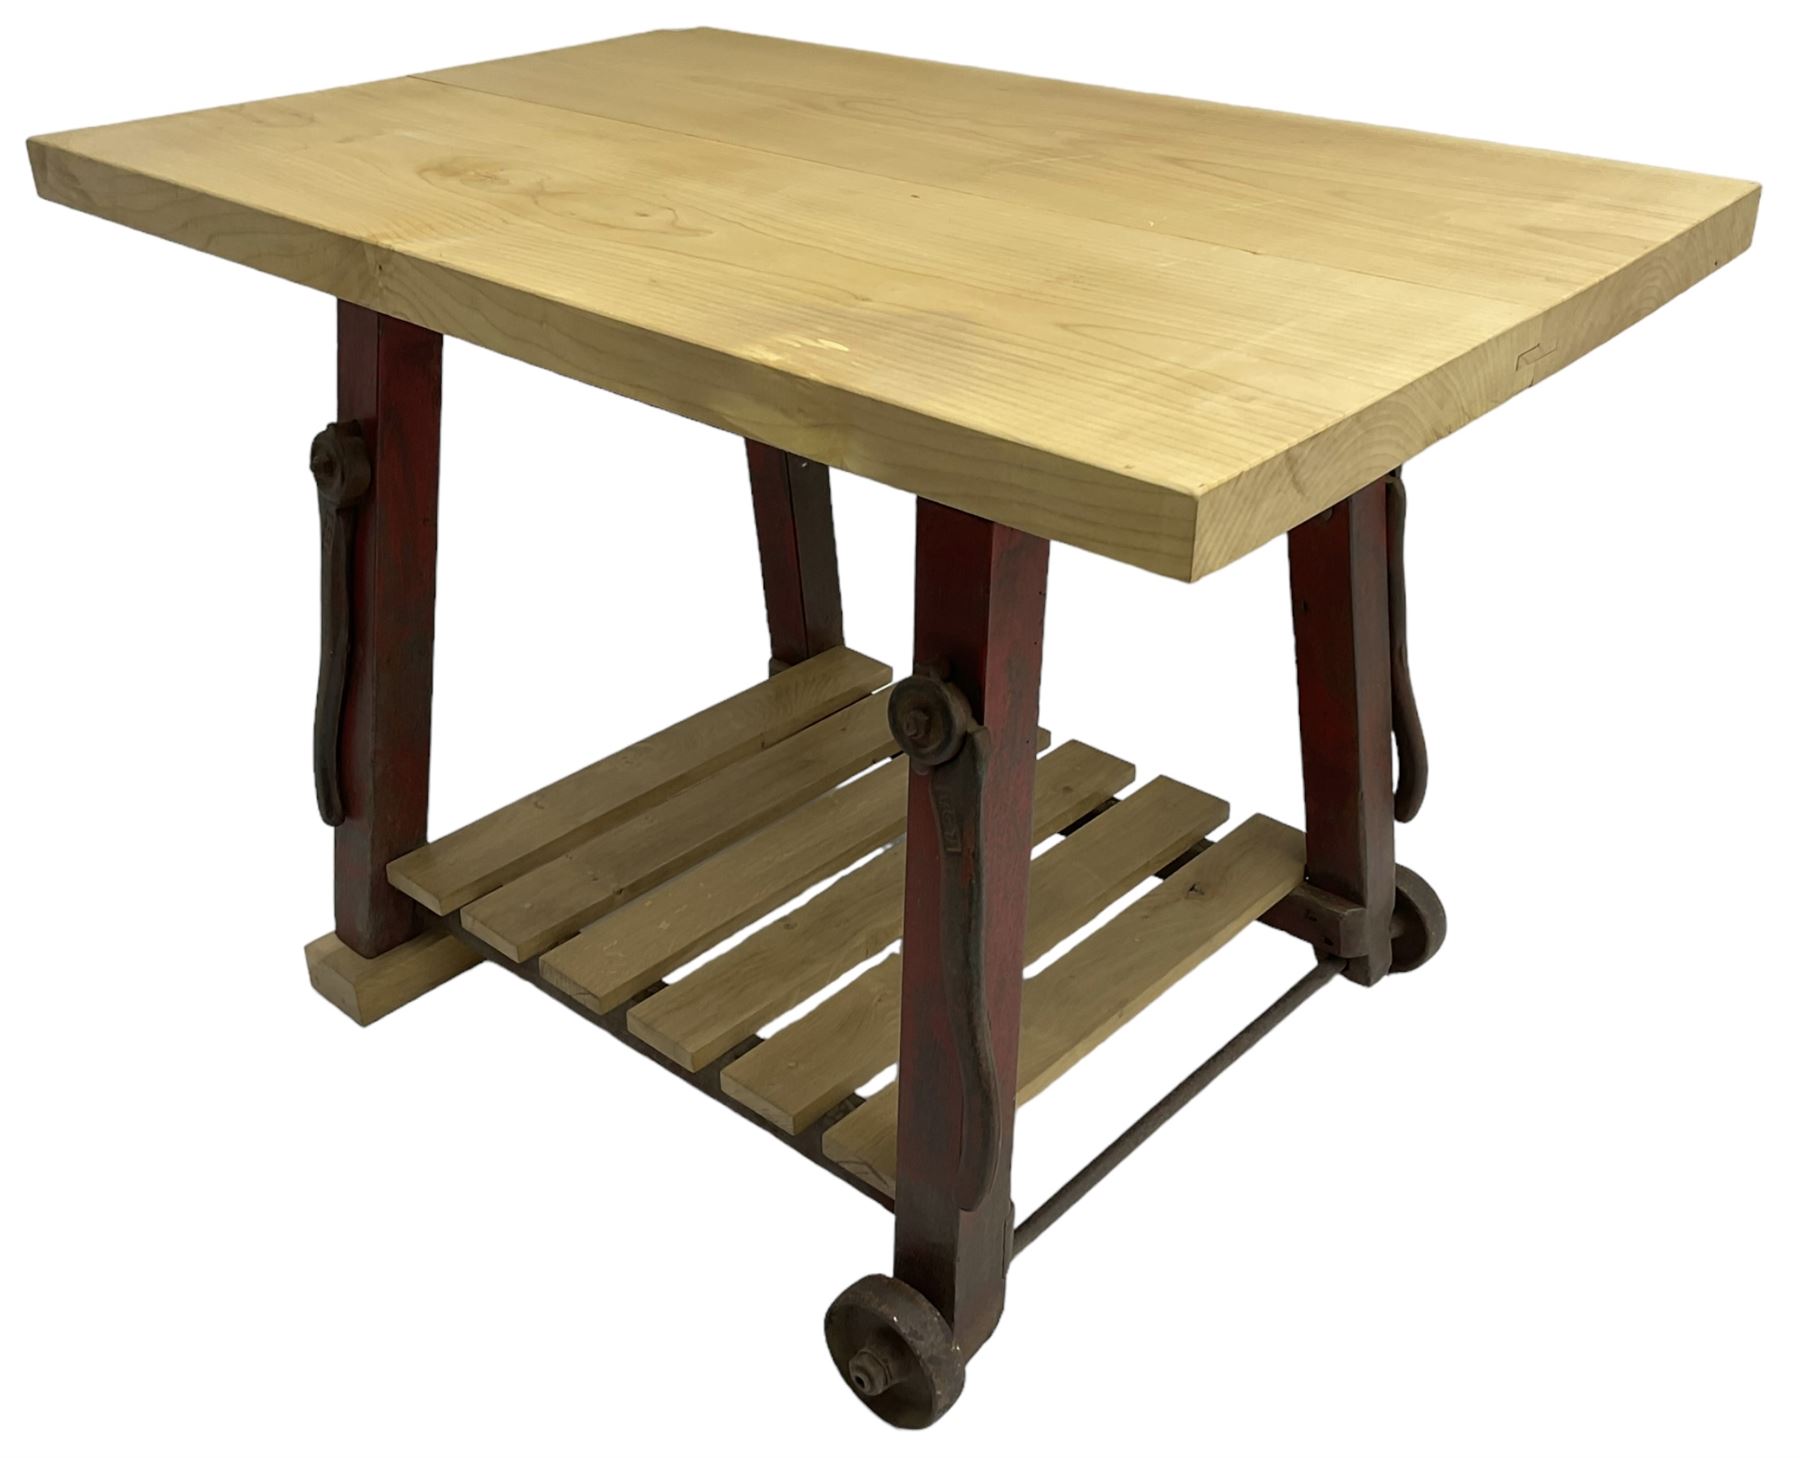 Kitchen island with rectangular maple top - Image 6 of 7